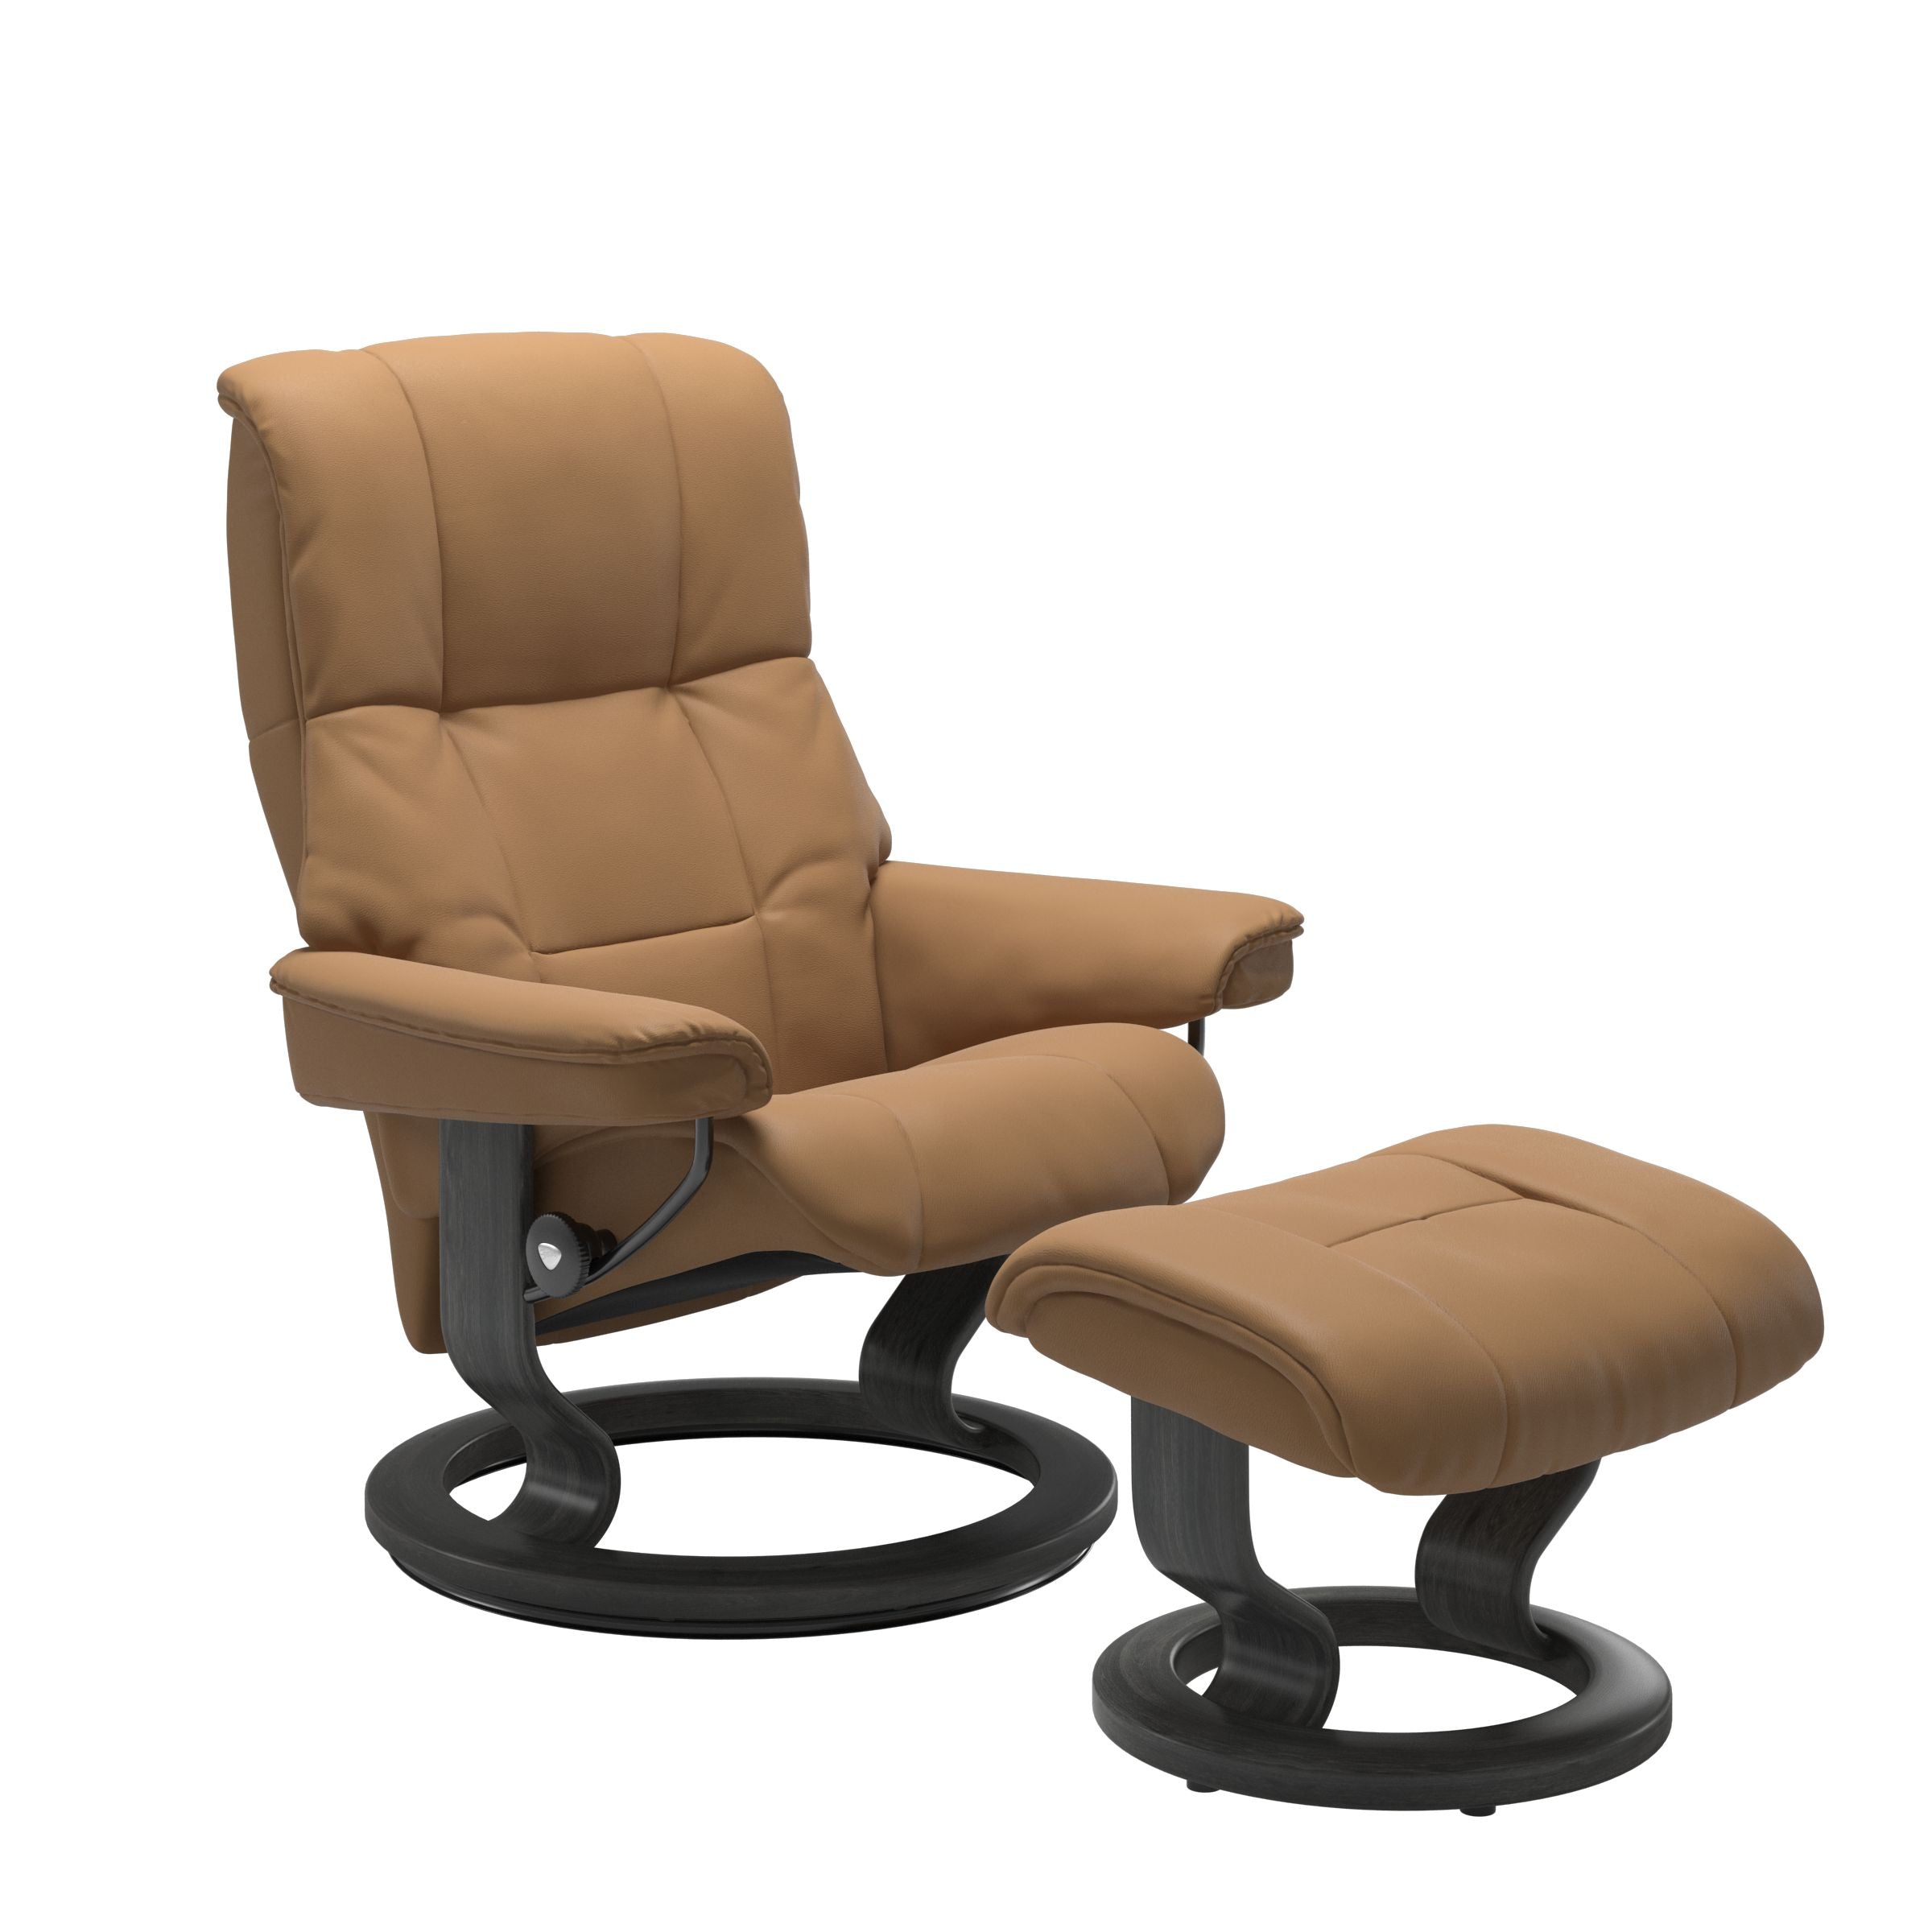 Stressless Mayfair Medium Recliner and Ottoman with Classic Base